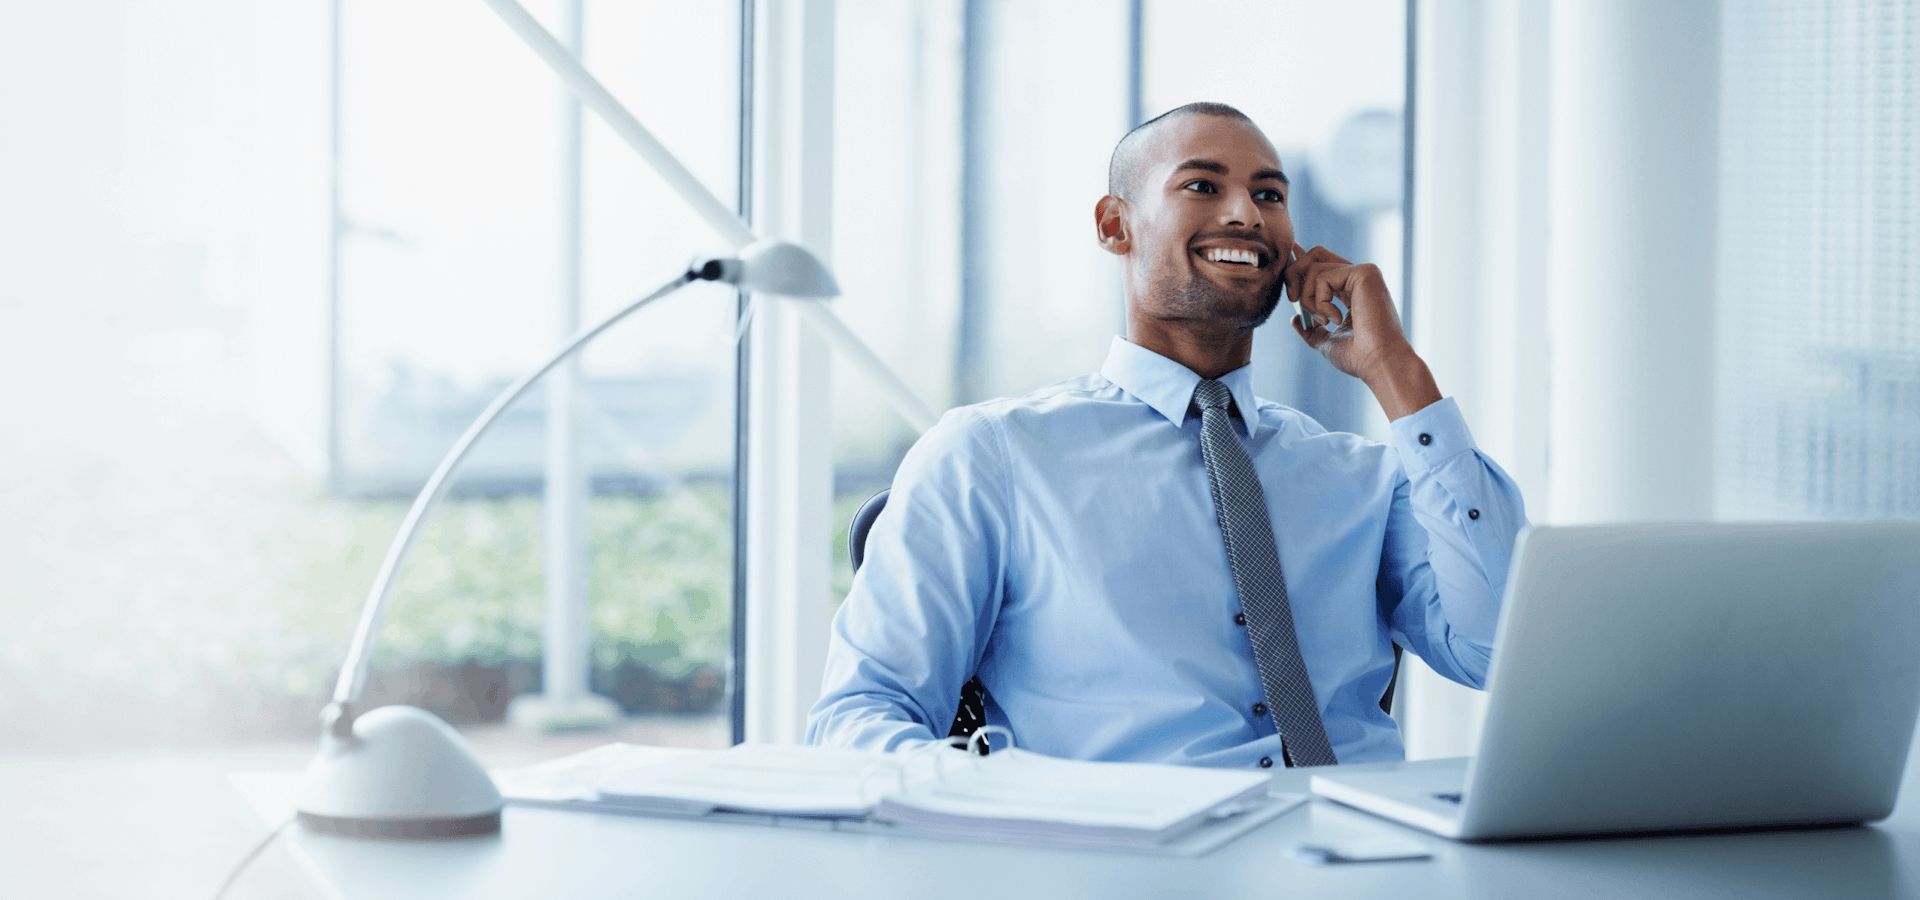 Smiling businessman looking away while using mobile phone at desk in office.